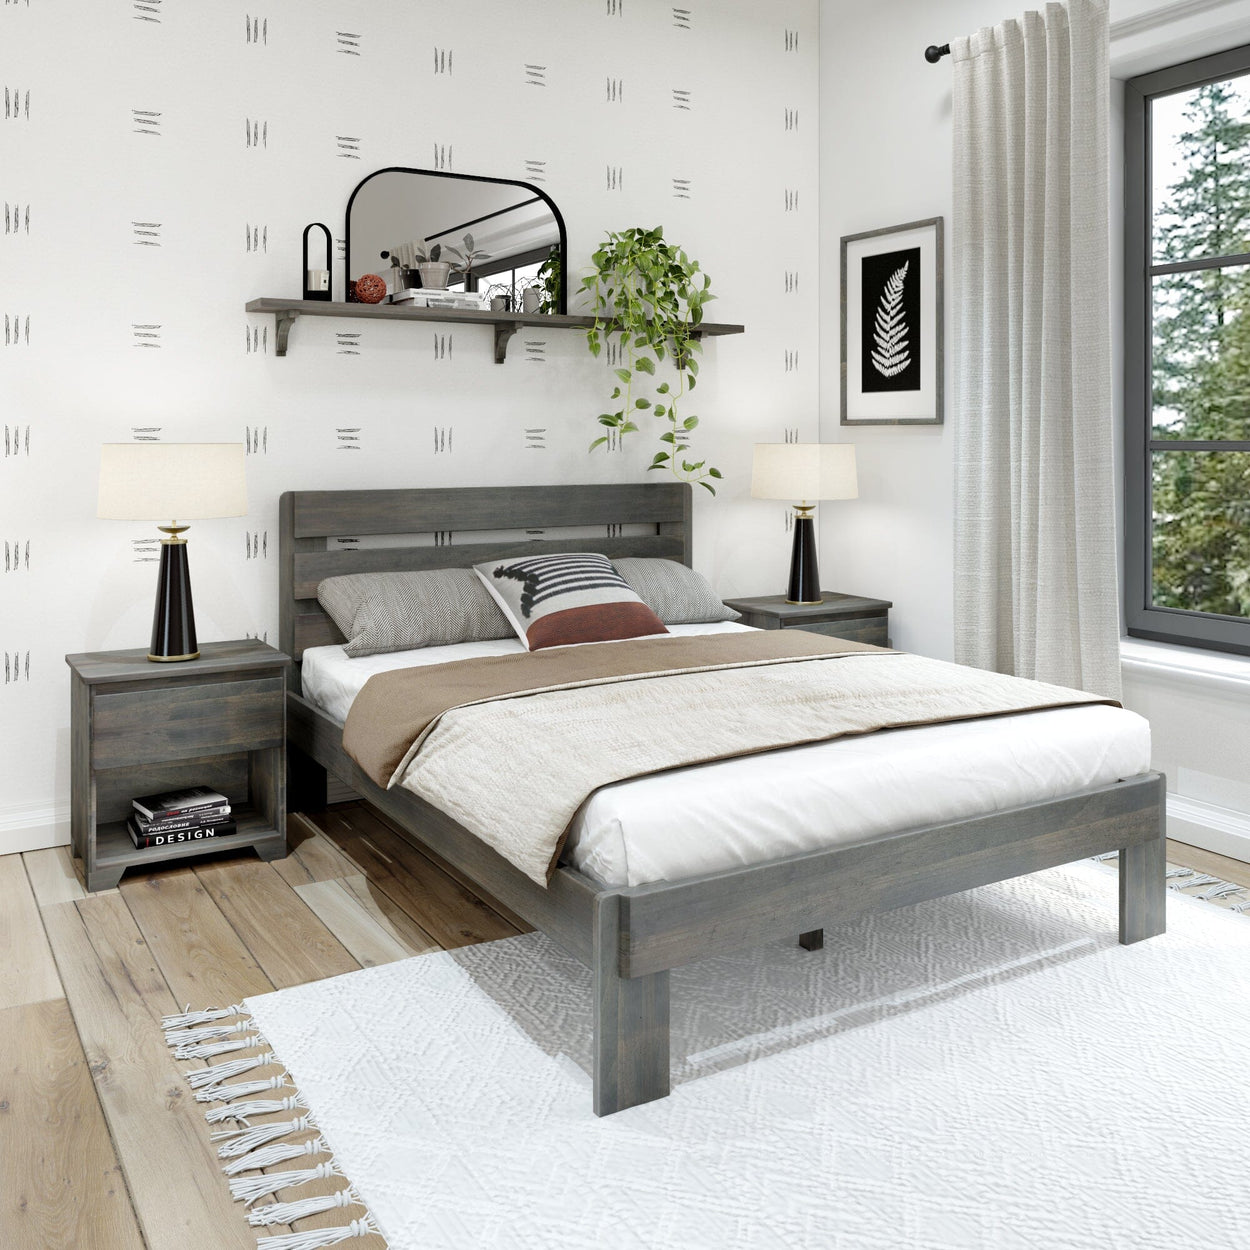 Rustic Queen Bed with Slatted Headboard Single Beds Plank+Beam Driftwood 